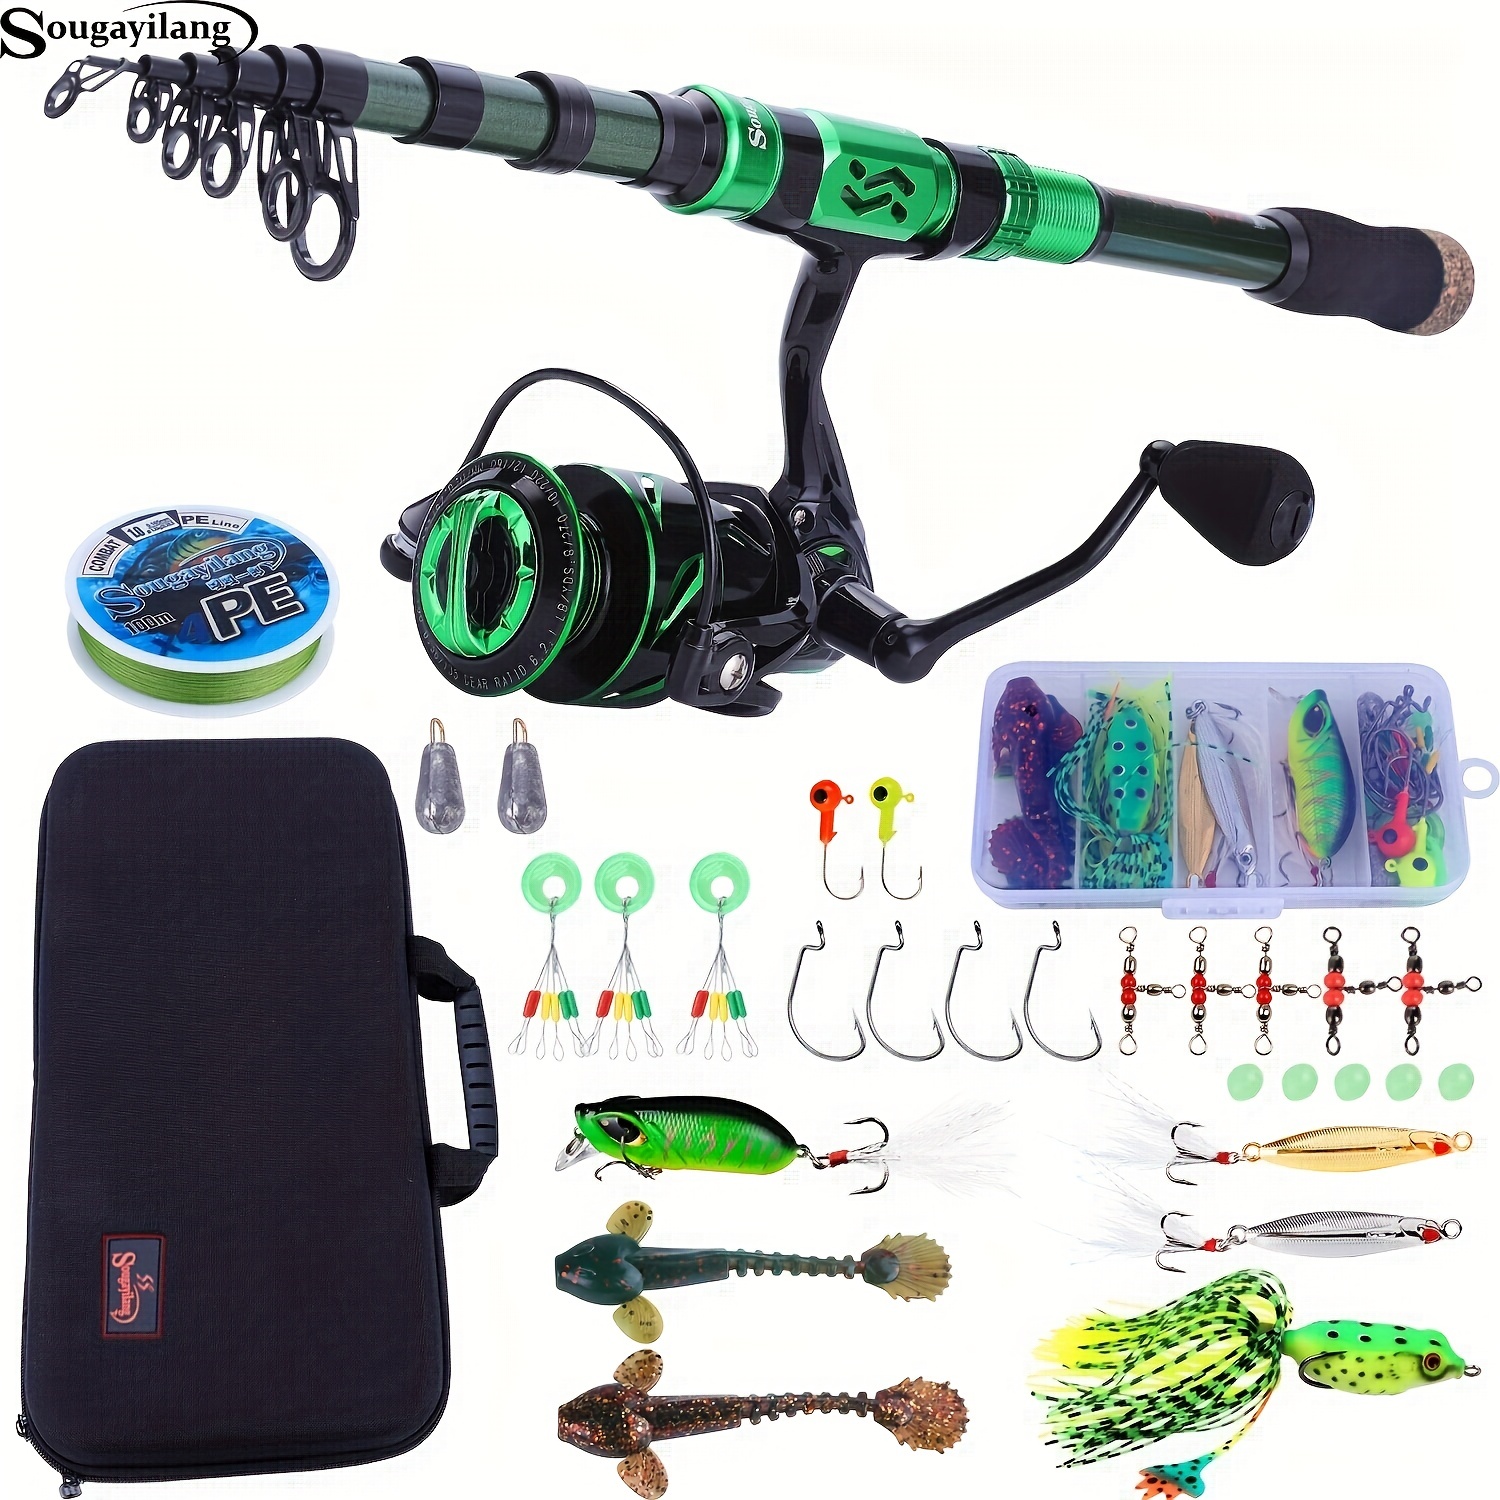 SOUGAYILANG Fishing Rod & Reel Combos: Carbon Fiber Telescopic Pole,  Spinning Reel & BBs - Perfect for Saltwater & Freshwater Fishing!